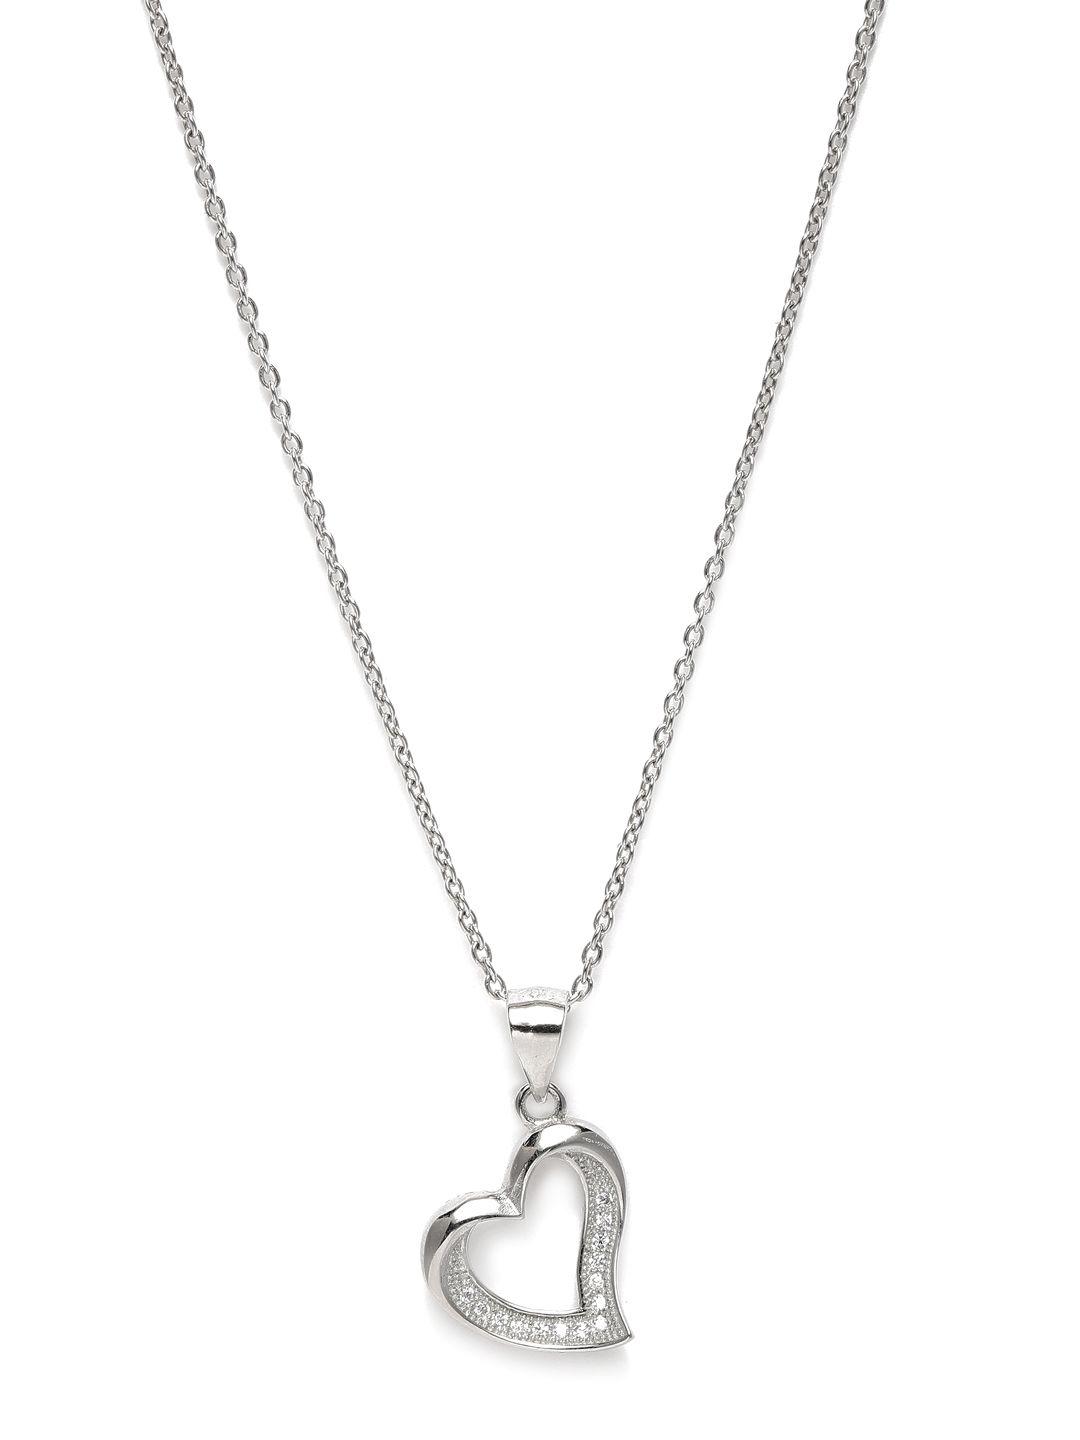 giva 925 sterling silver rhodium-plated necklace